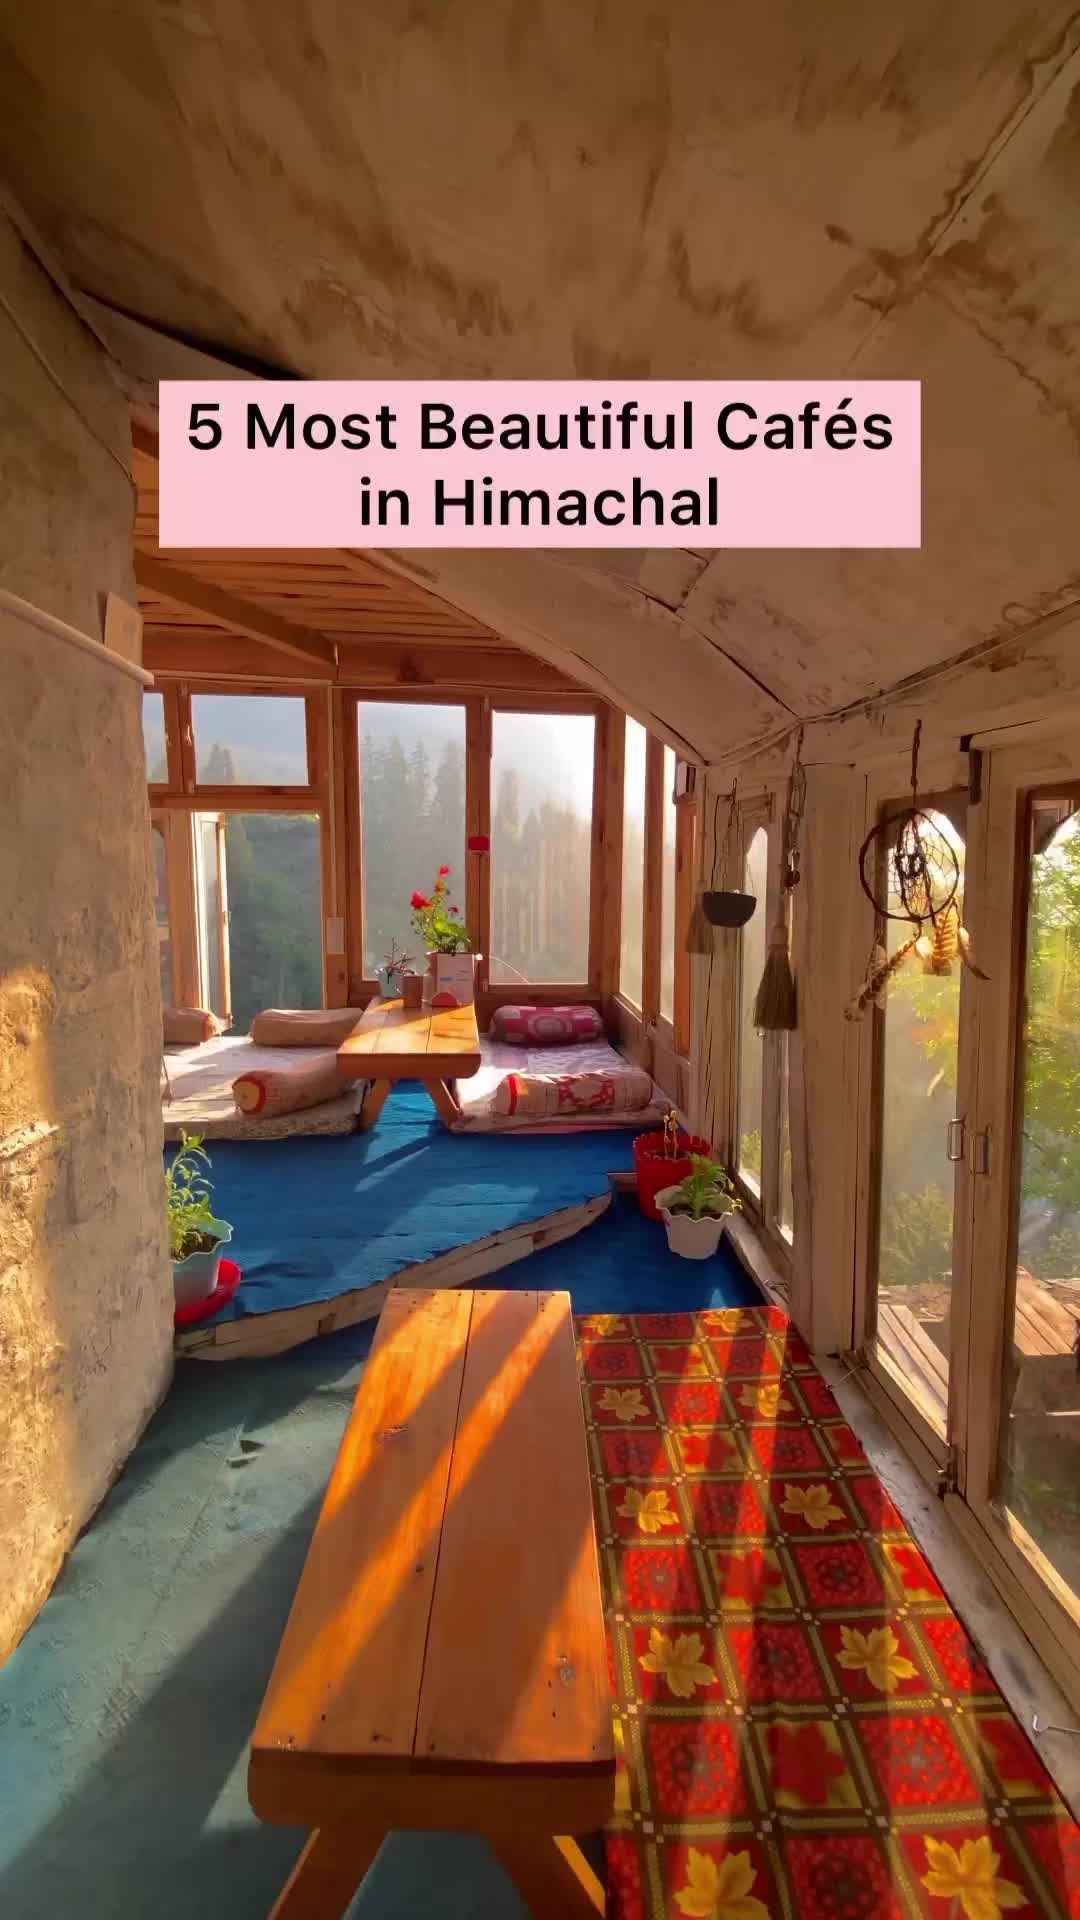 Save this for your Himachal Trip 🫶🏻

And which one is your favourite, tell us in the comment section ♥️🙌🏻

#cafesinhimachal #explorehimachal #himachalpradesh #mountains #himachaltourism #indiatravelgram #travelreels #beautifulcafes